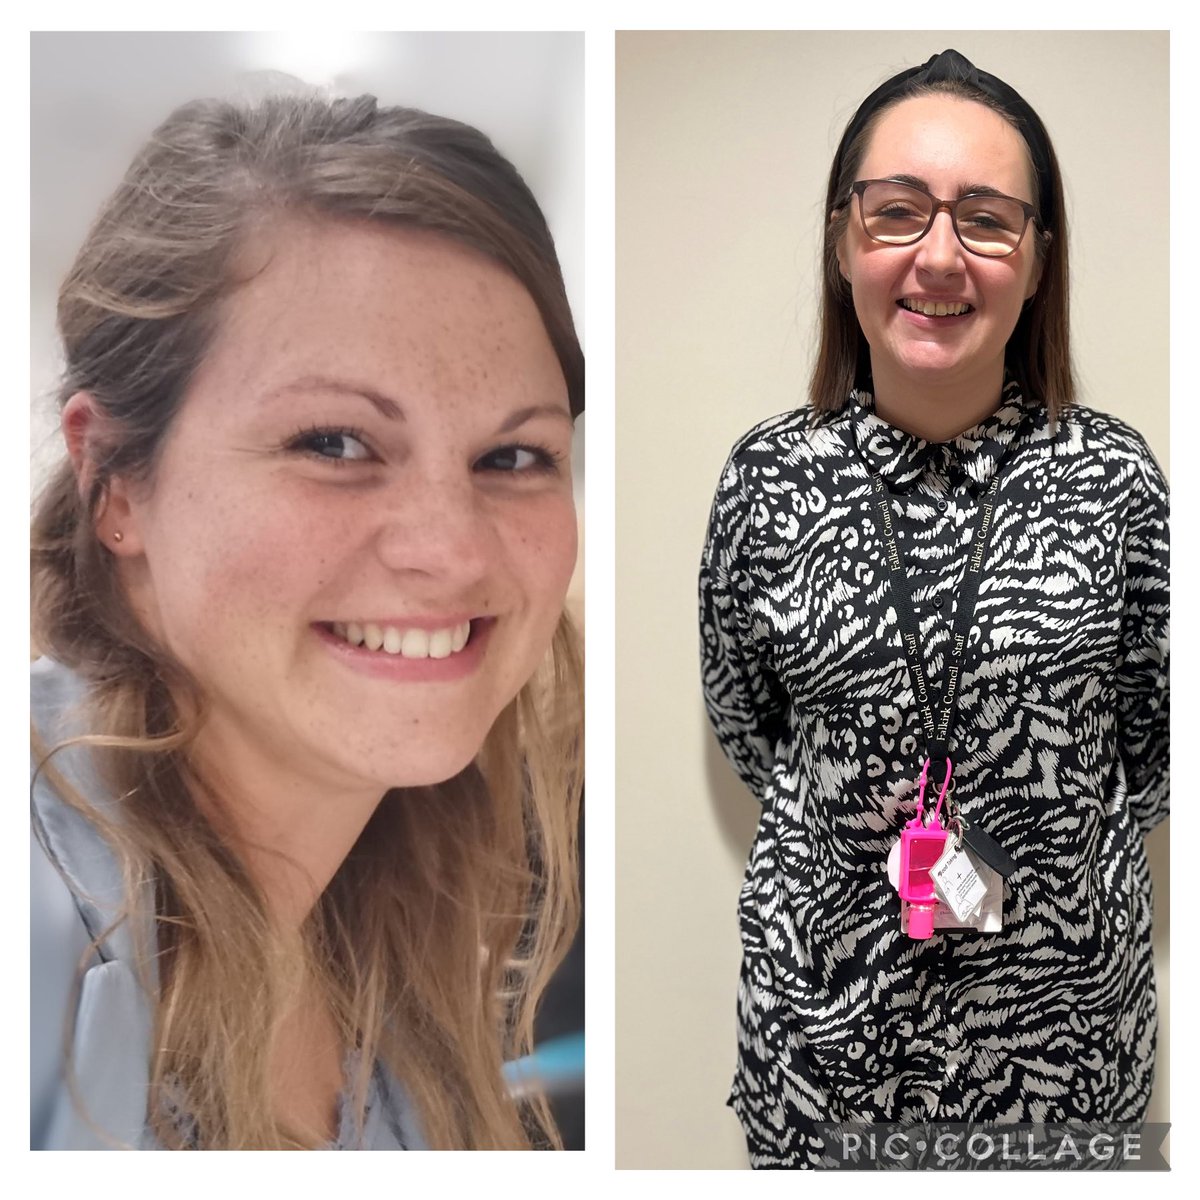 Next week we welcome back Hayley from her maternity leave. We also have Stacey newly joining our team also. Stacey will be present at the start of the week and Hayley at the end of the week. ☺️ #WelcomeBack #NewAdventures